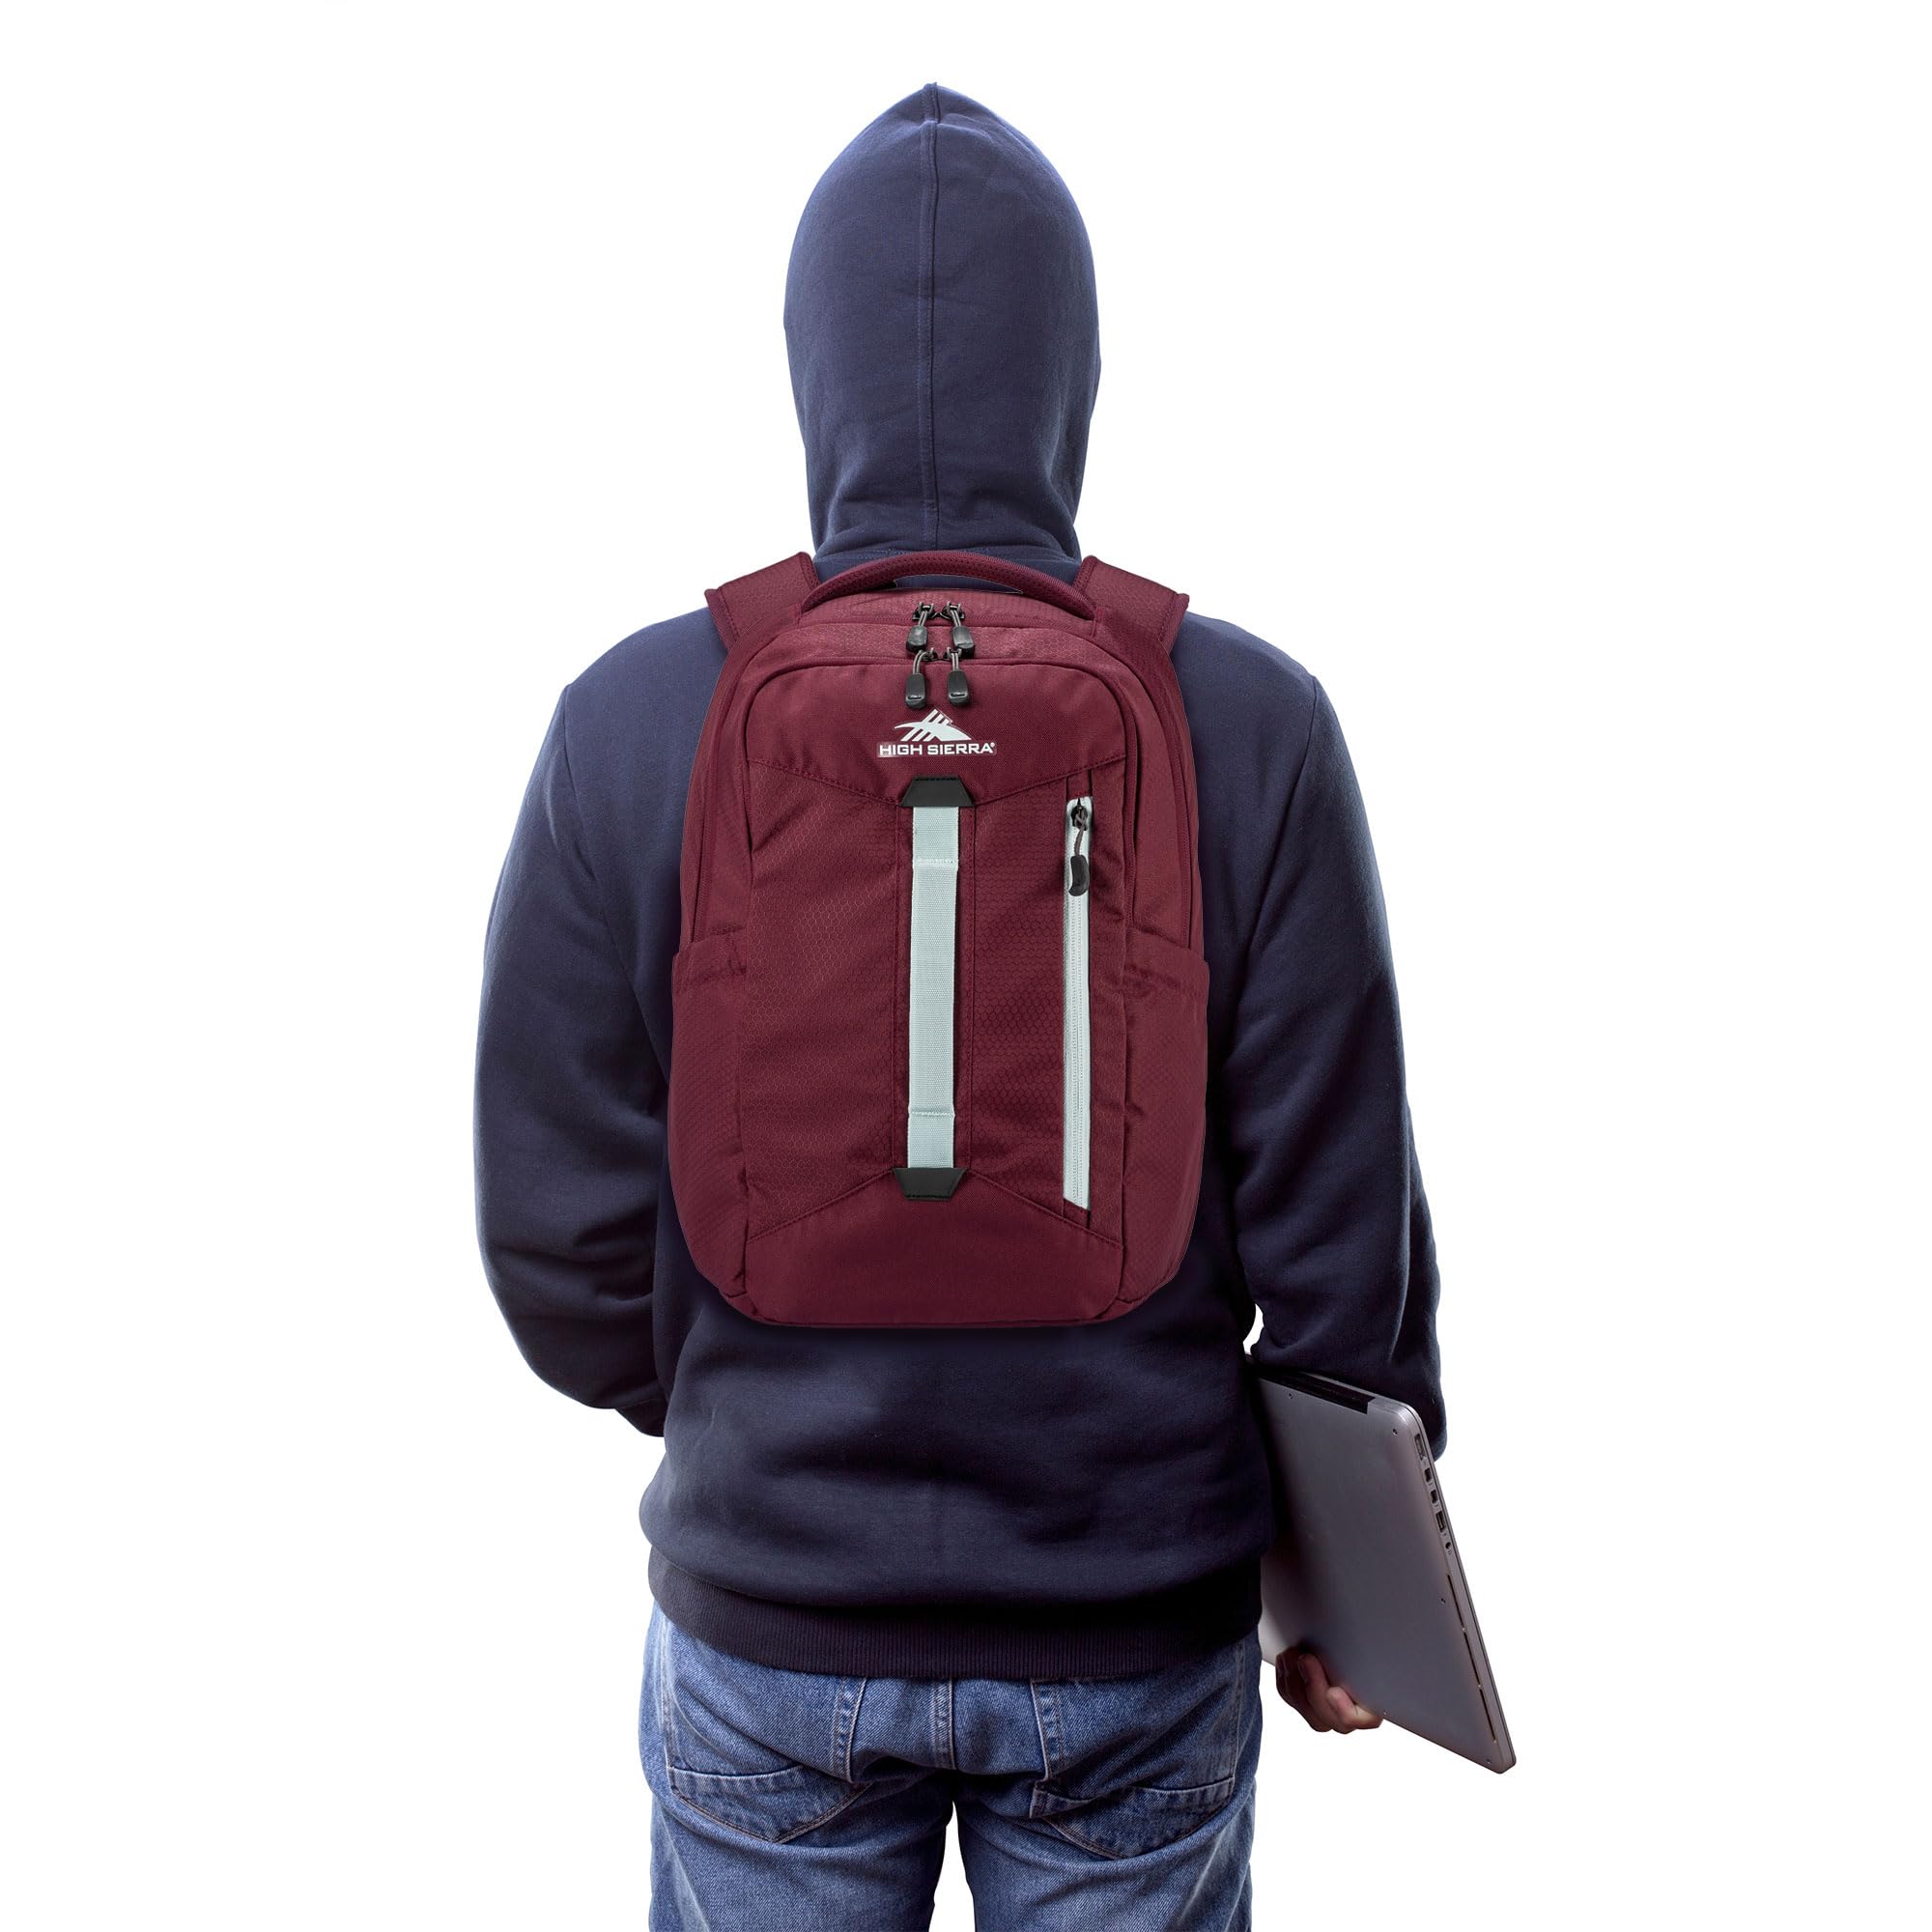 High Sierra Everyday Backpack with Device Sleeve and Adjustable Straps, Maroon